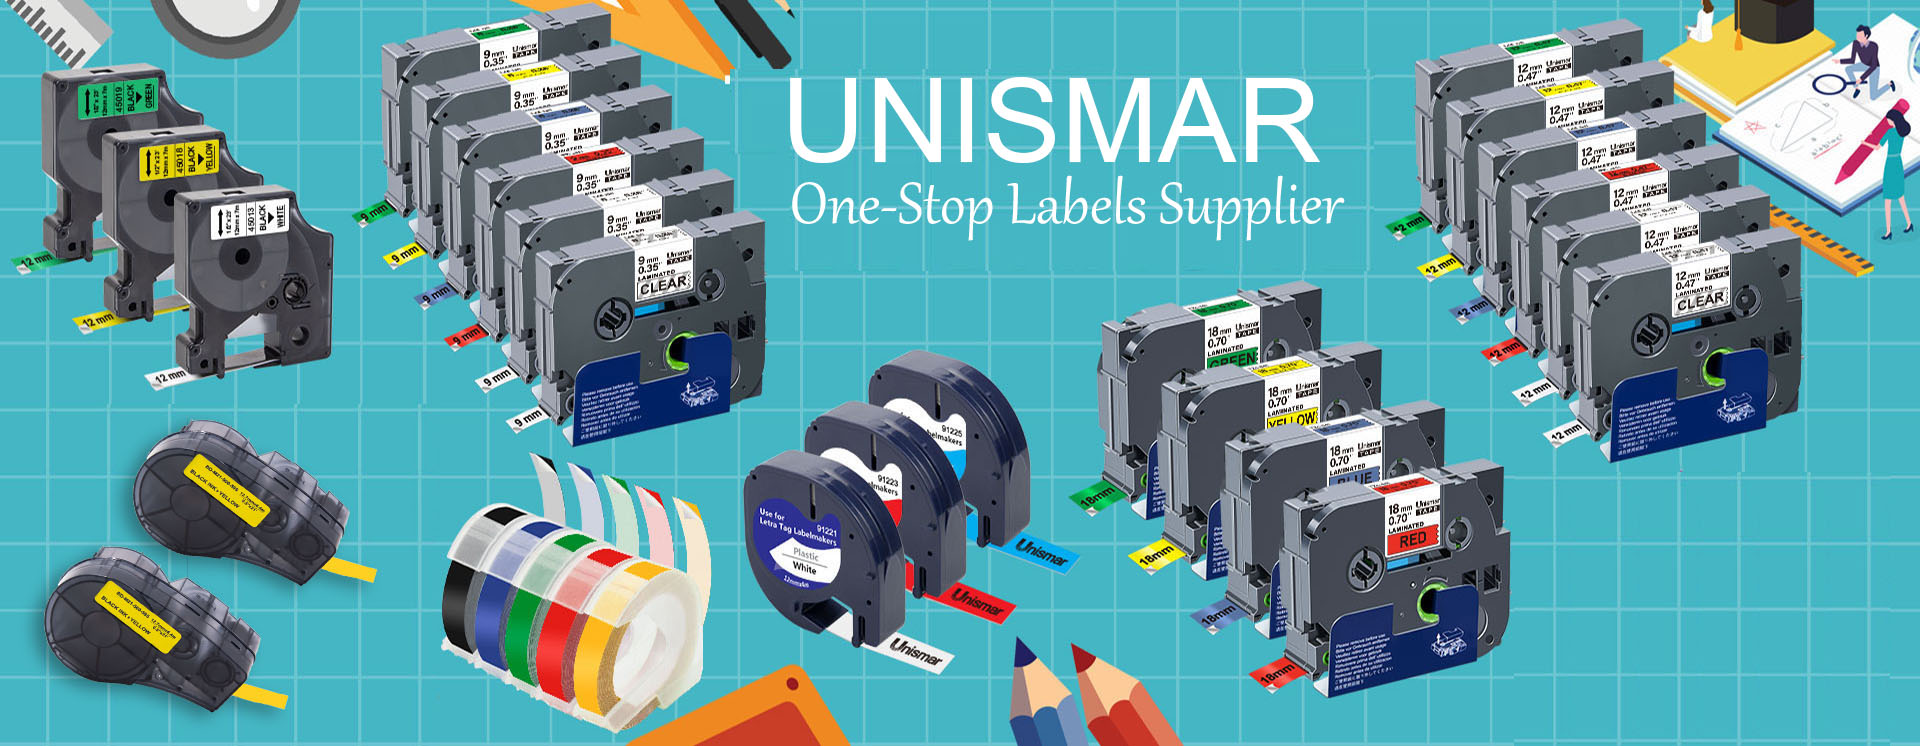 UNISMAR - One-stop supplier of label tape for Brady, Brother and Dymo printer